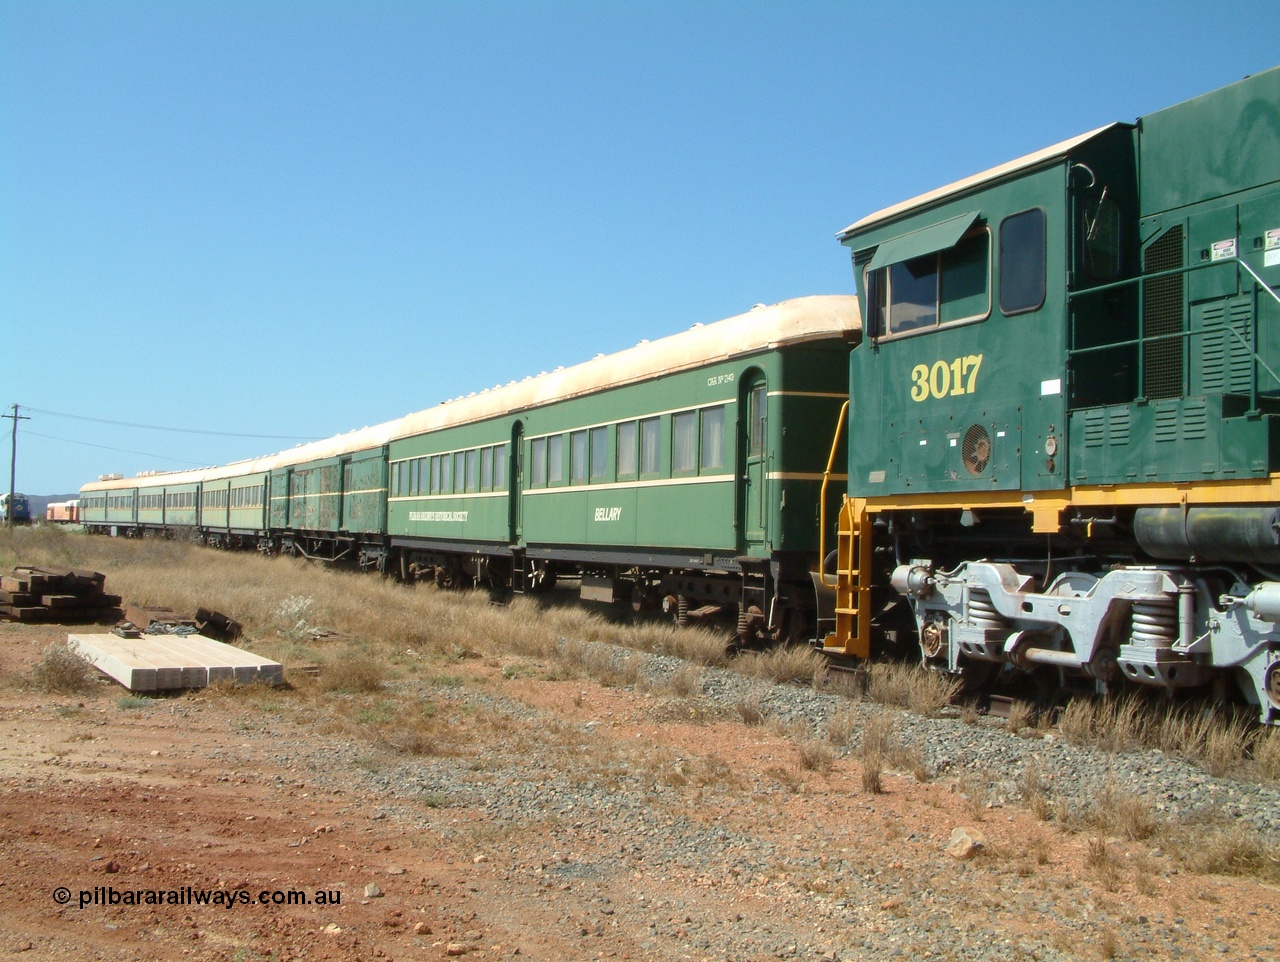 041014 142318
Pilbara Railways Historical Society, view along the passenger carriages behind rebuilt ALCo C636R locomotive 3017 with the first passenger carriage 'Bellary' was originally built by Clyde Engineering at Granville NSW in 1936 for the NSWGR as a second class railway carriage FS type FS 2143. In 1987 it was purchased by the Society and is named after a local river. The next carriage is van 'Portland' and originally an NSWGR MHO type guards van MHO 2321, then recoded to KB type mail van, then to KBY 2513 guards van. 14th October 2004.
Keywords: 3017;Comeng-WA;ALCo;C636R;WA-135-C-6043-04;rebuild;